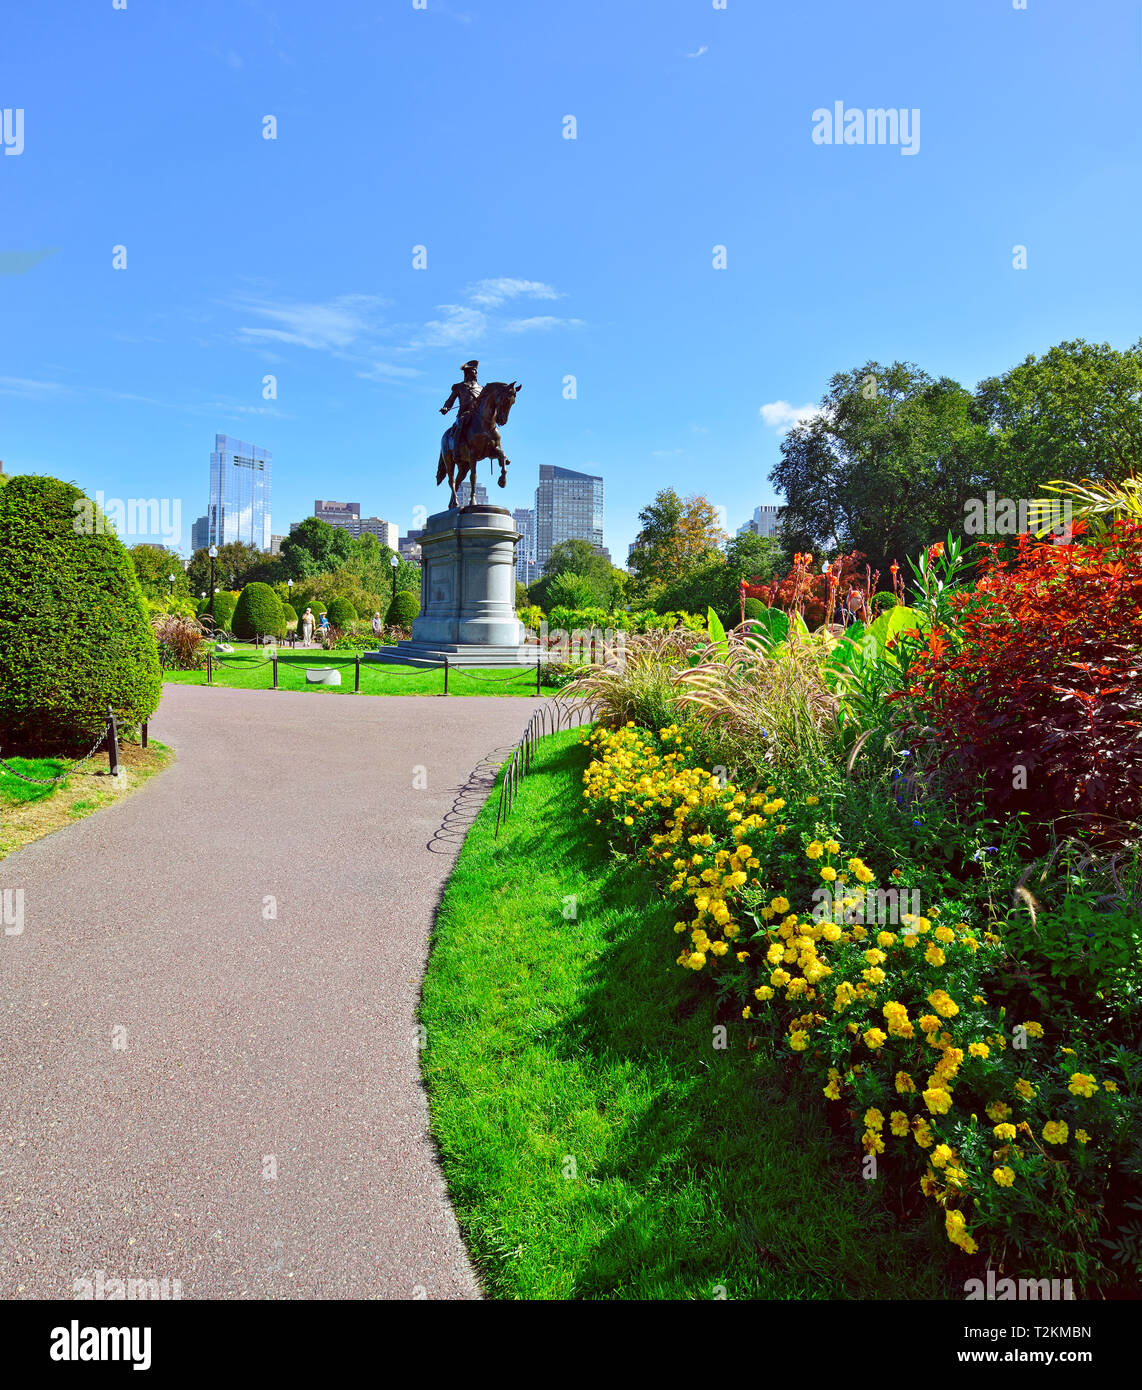 Boston Public Garden, summer and fall grounds landscaping. Washington statue and city skyline in background Stock Photo